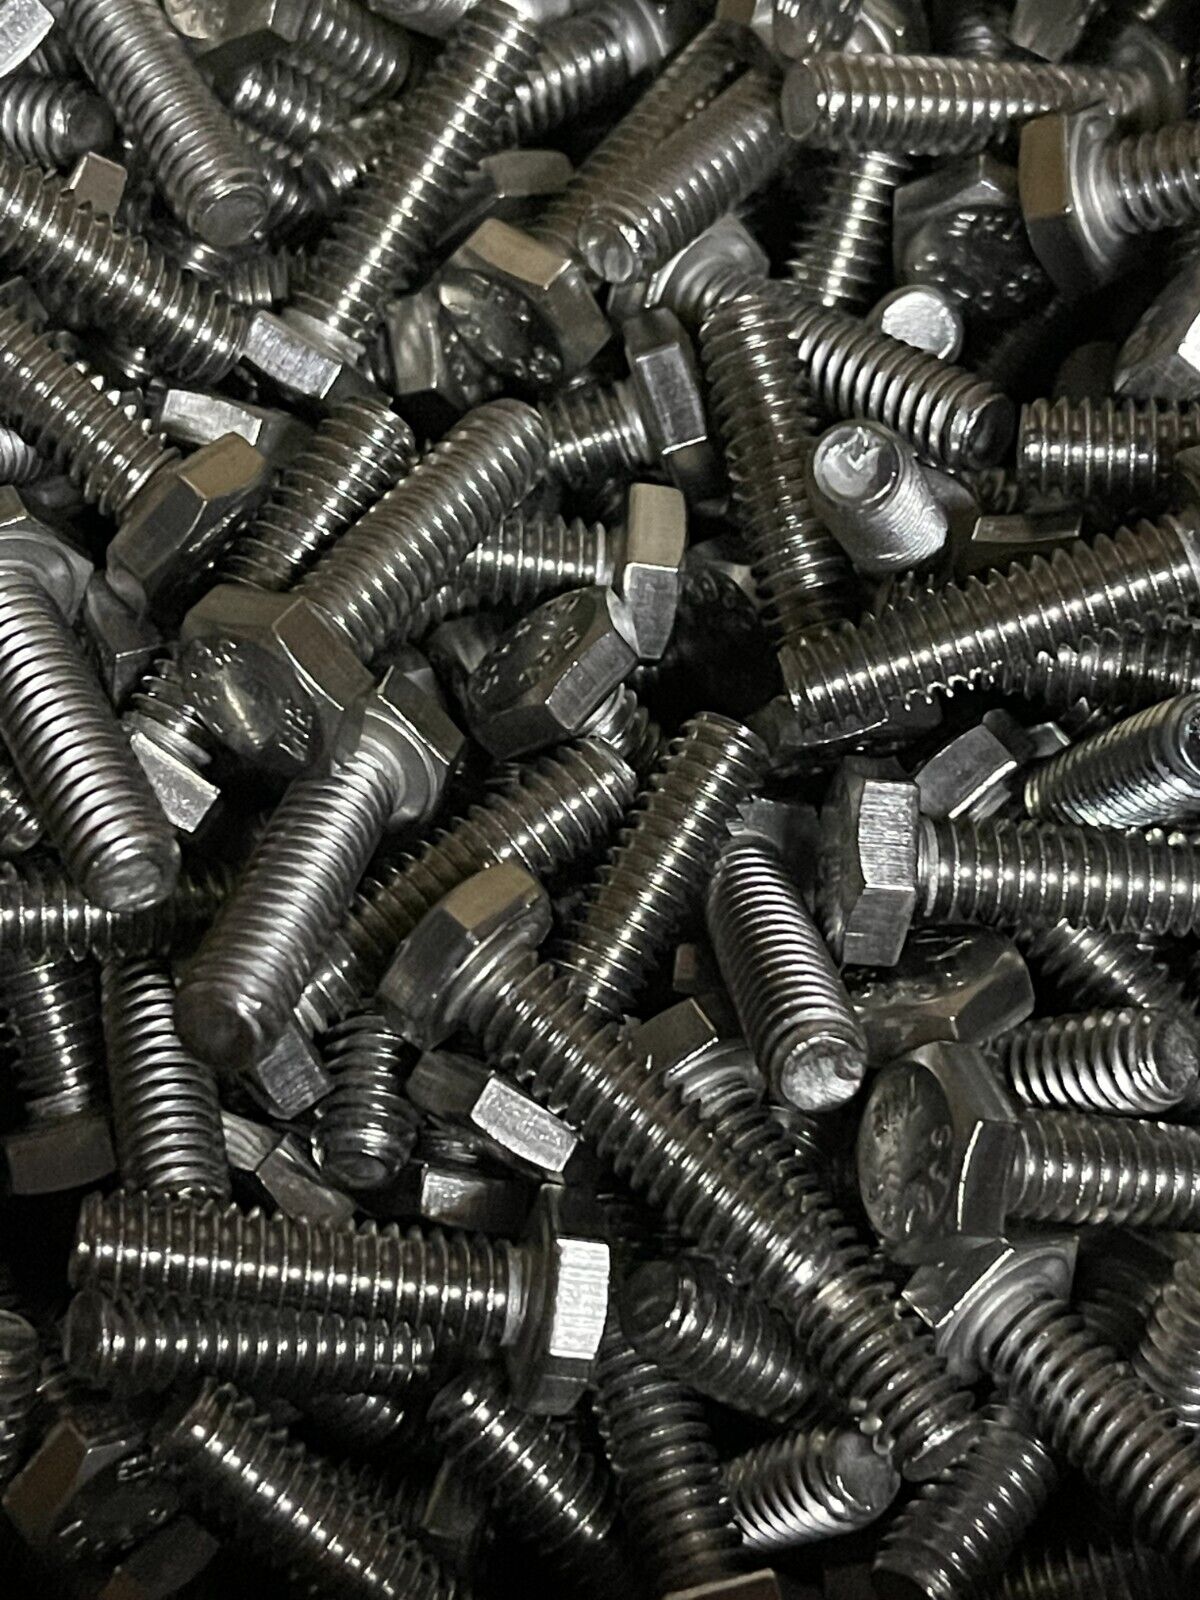 1/4"-20 x 1" HEX CAP SCREWS (BOLTS), 304 STAINLESS STEEL. MULTIPLE QUANTITIES